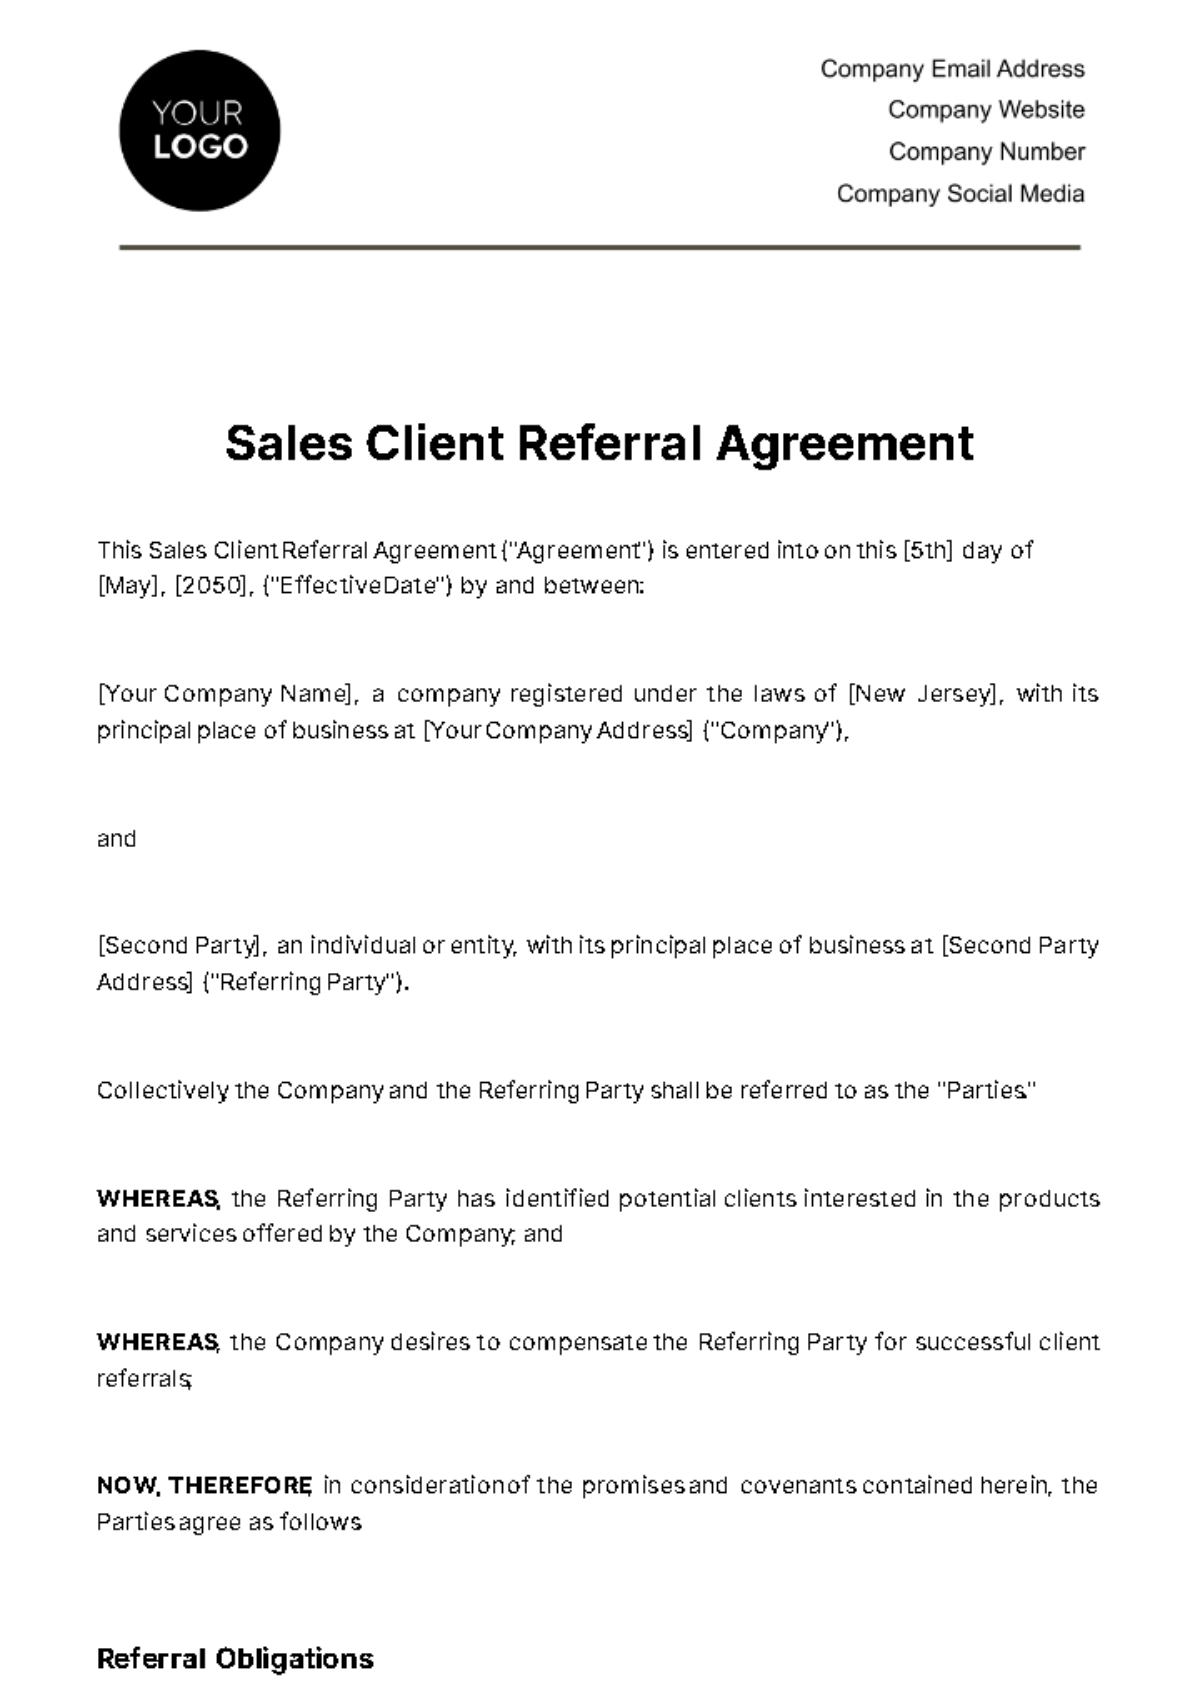 Free Sales Client Referral Agreement Template